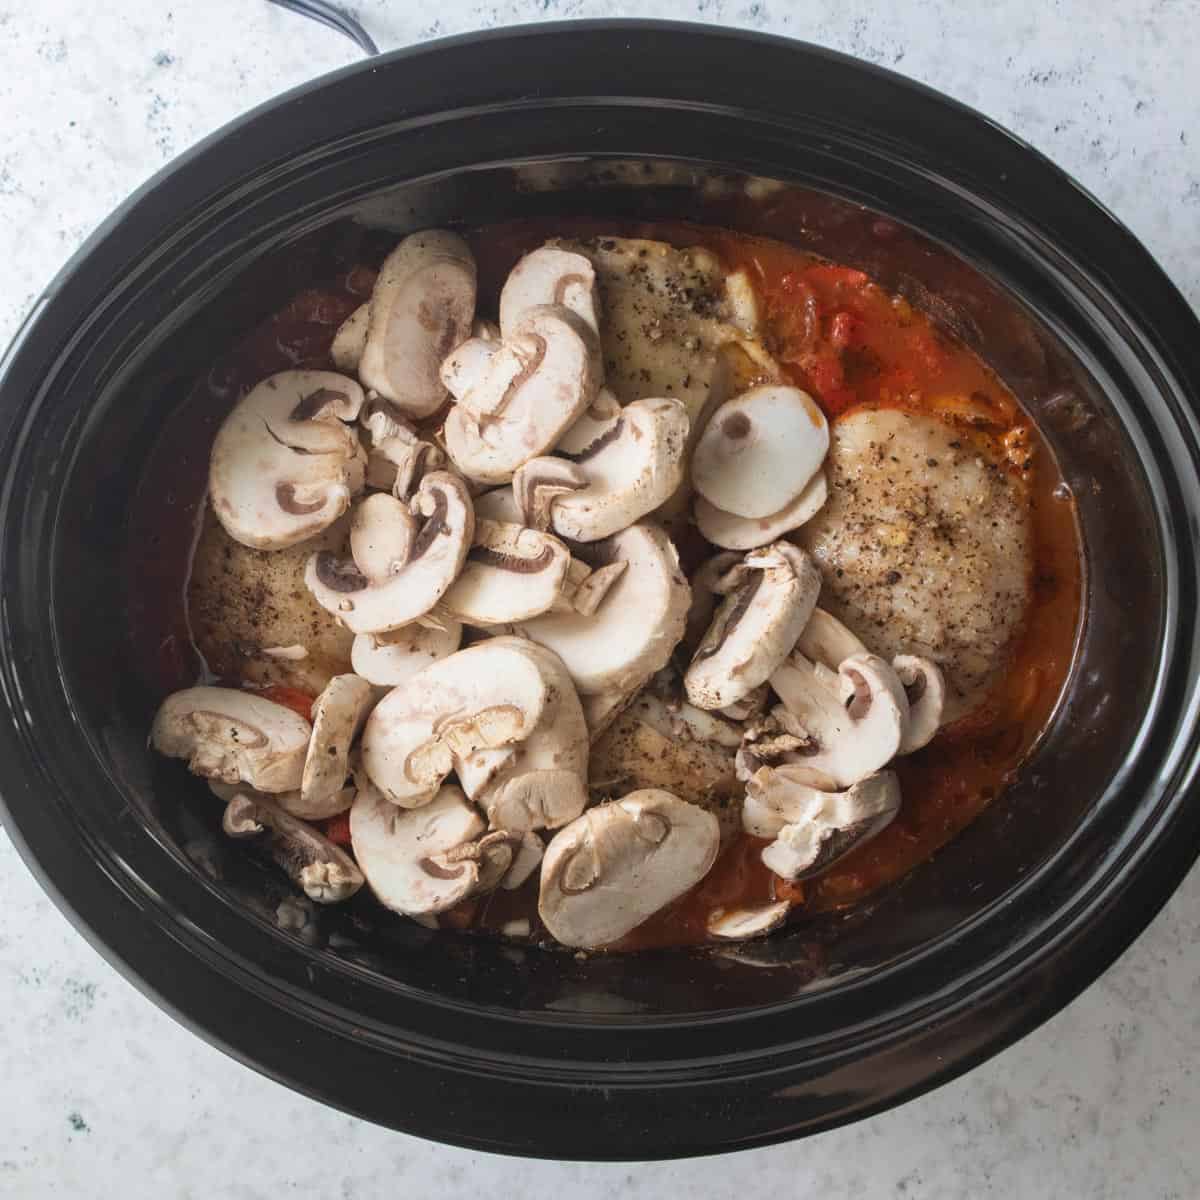 sliced mushrooms added to slow cooker with chicken thighs